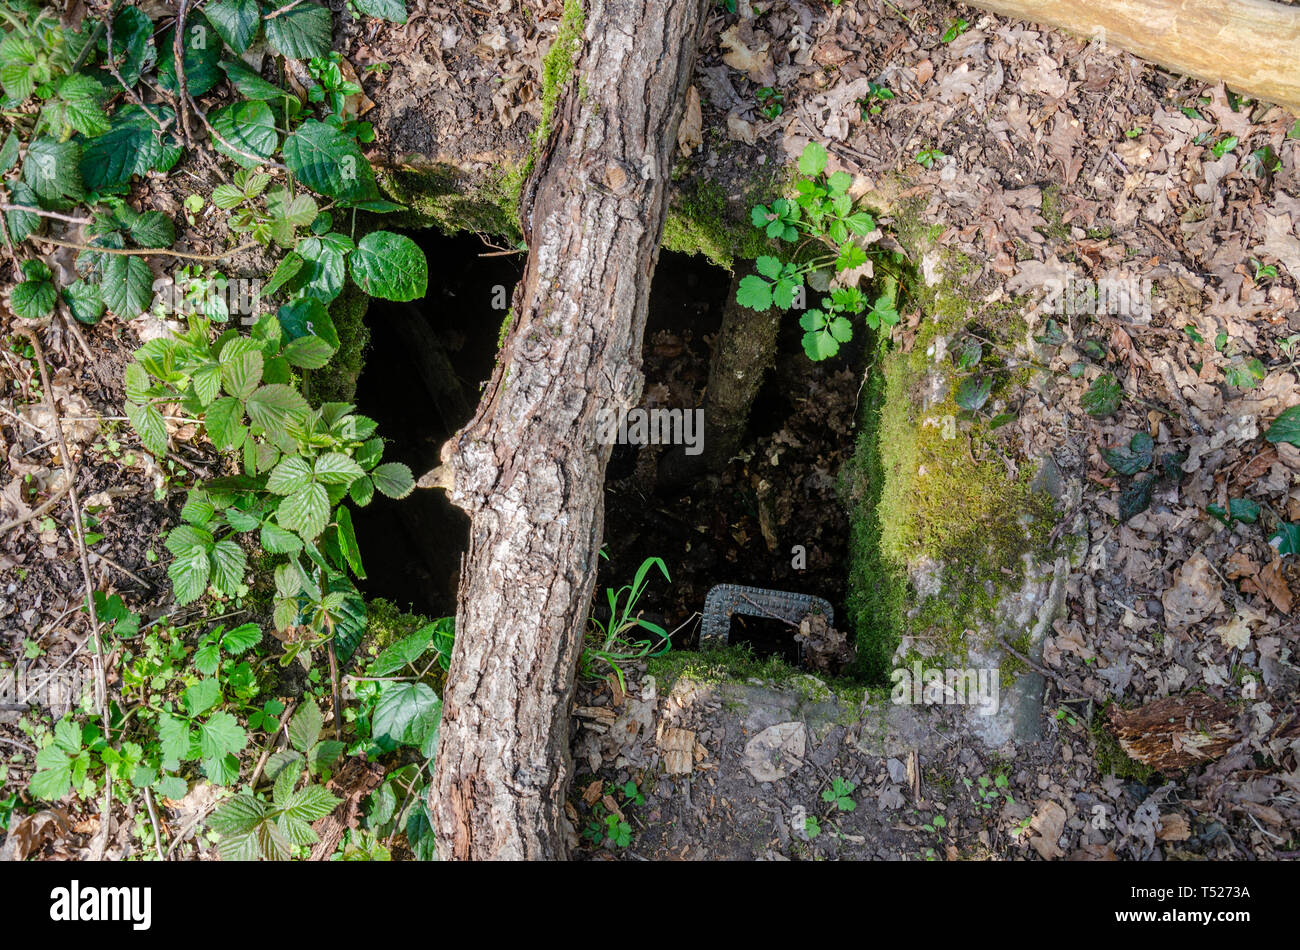 A shaft leading down to an underground bunker, a remnant from World War 2 in what is now woodland. Stock Photo